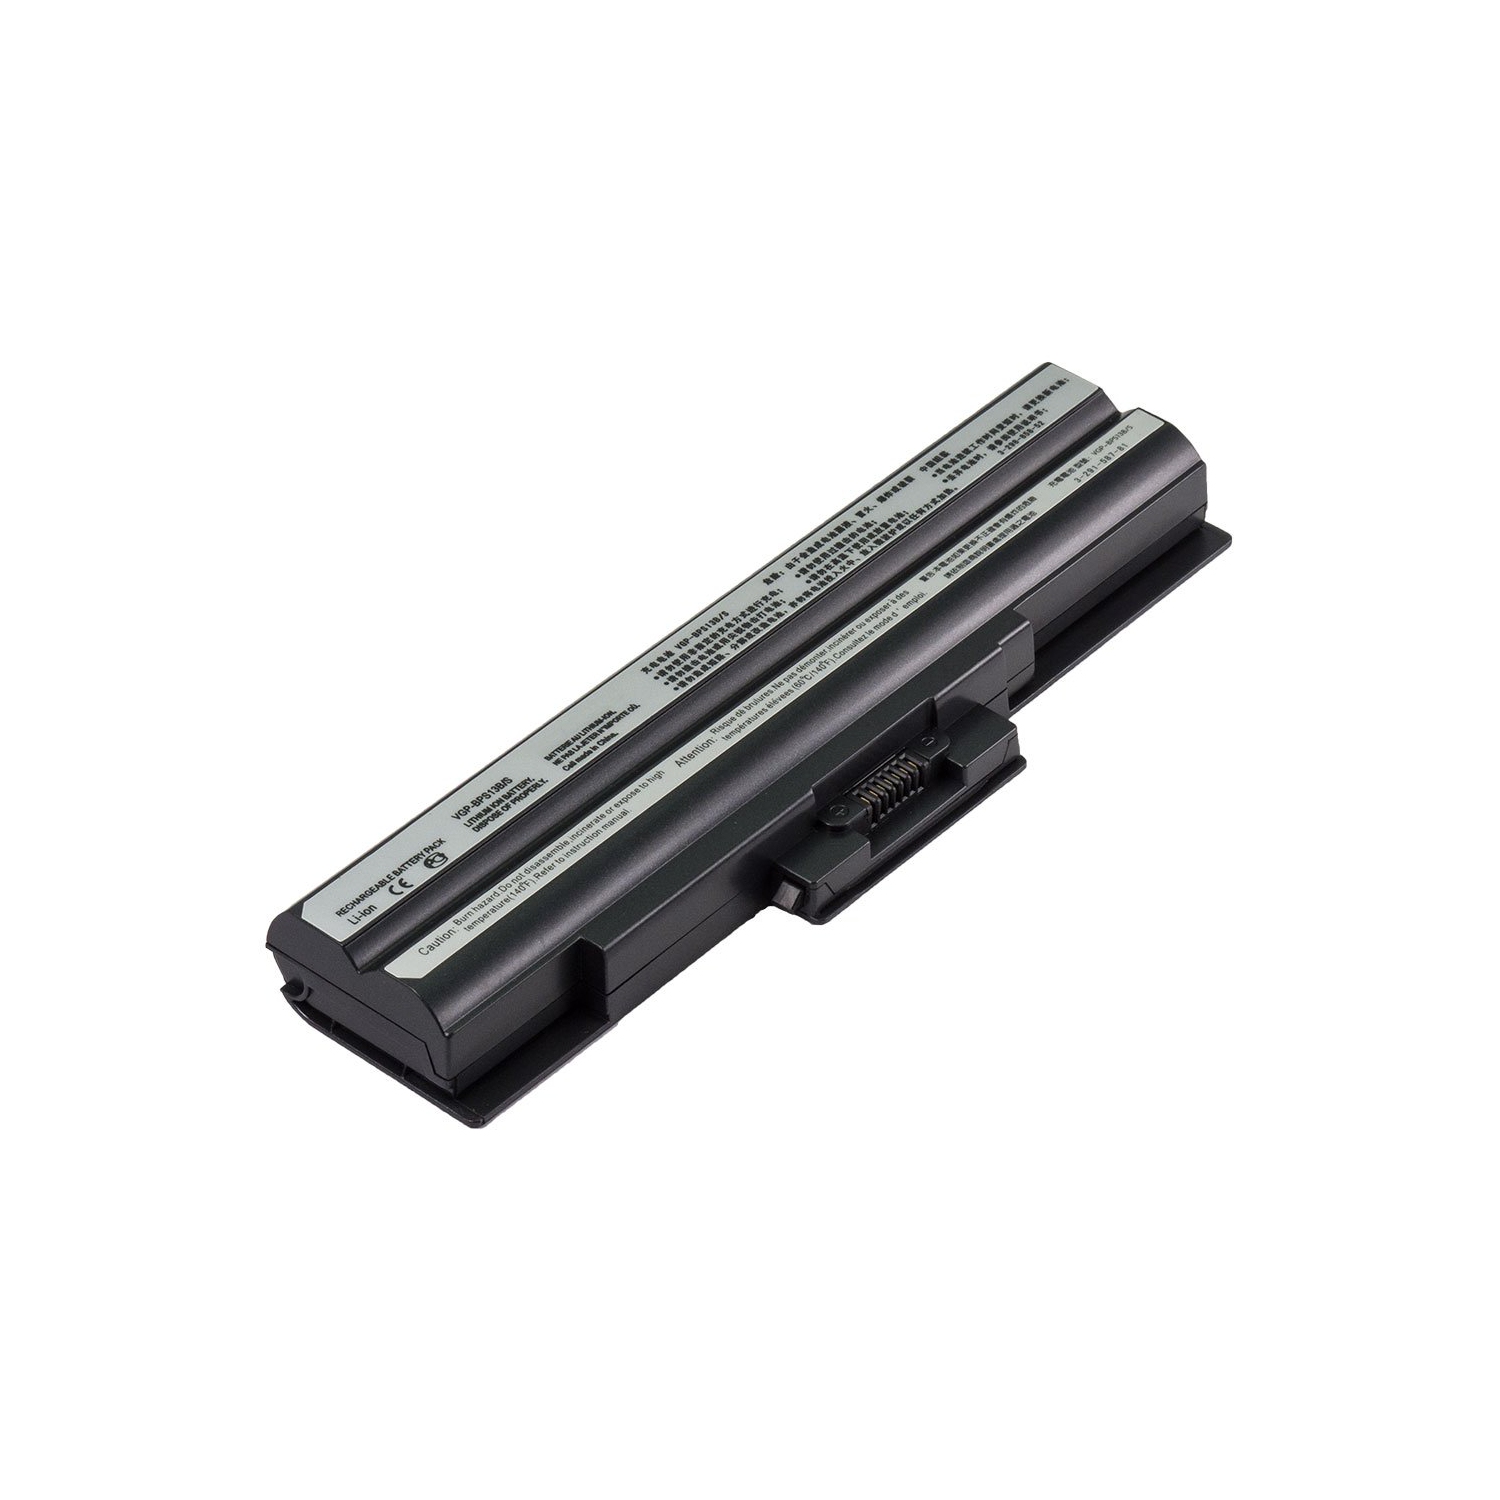 Laptop Battery Replacement for Sony VAIO VGN-AW390 CTO, VGP-BPS13, VGP-BPS13/S, VGP-BPS13A/Q, VGP-BPS13B/B, VGP-BSP13/S